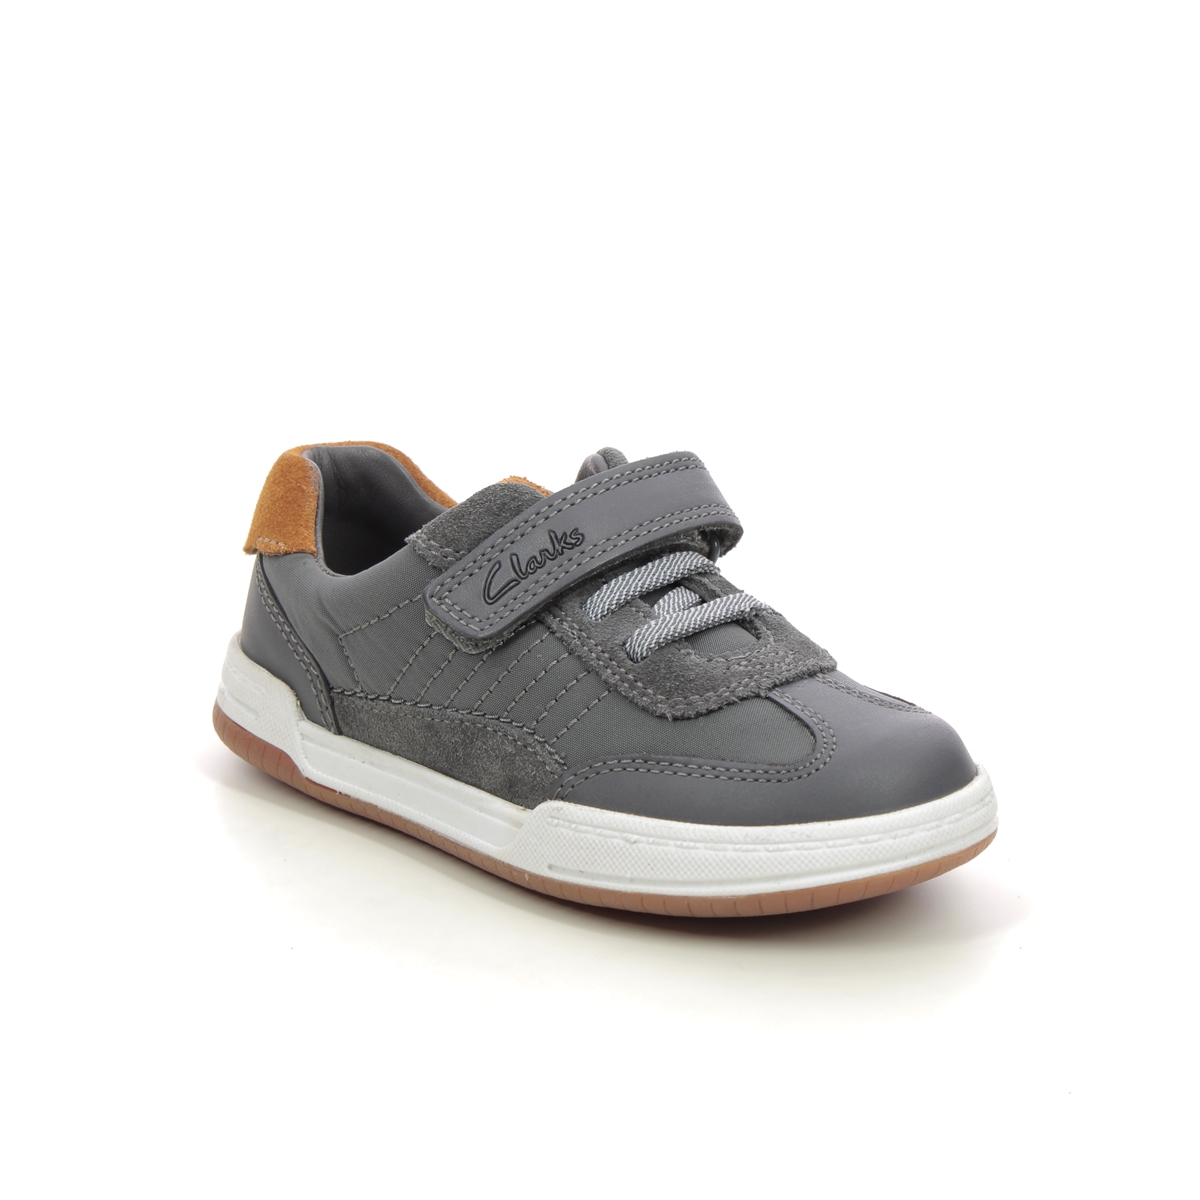 Clarks Fawn Family K Grey Leather Kids Boys Toddler Shoes 751156F In Size 8 In Plain Grey Leather F Width Fitting Regular Fit For kids